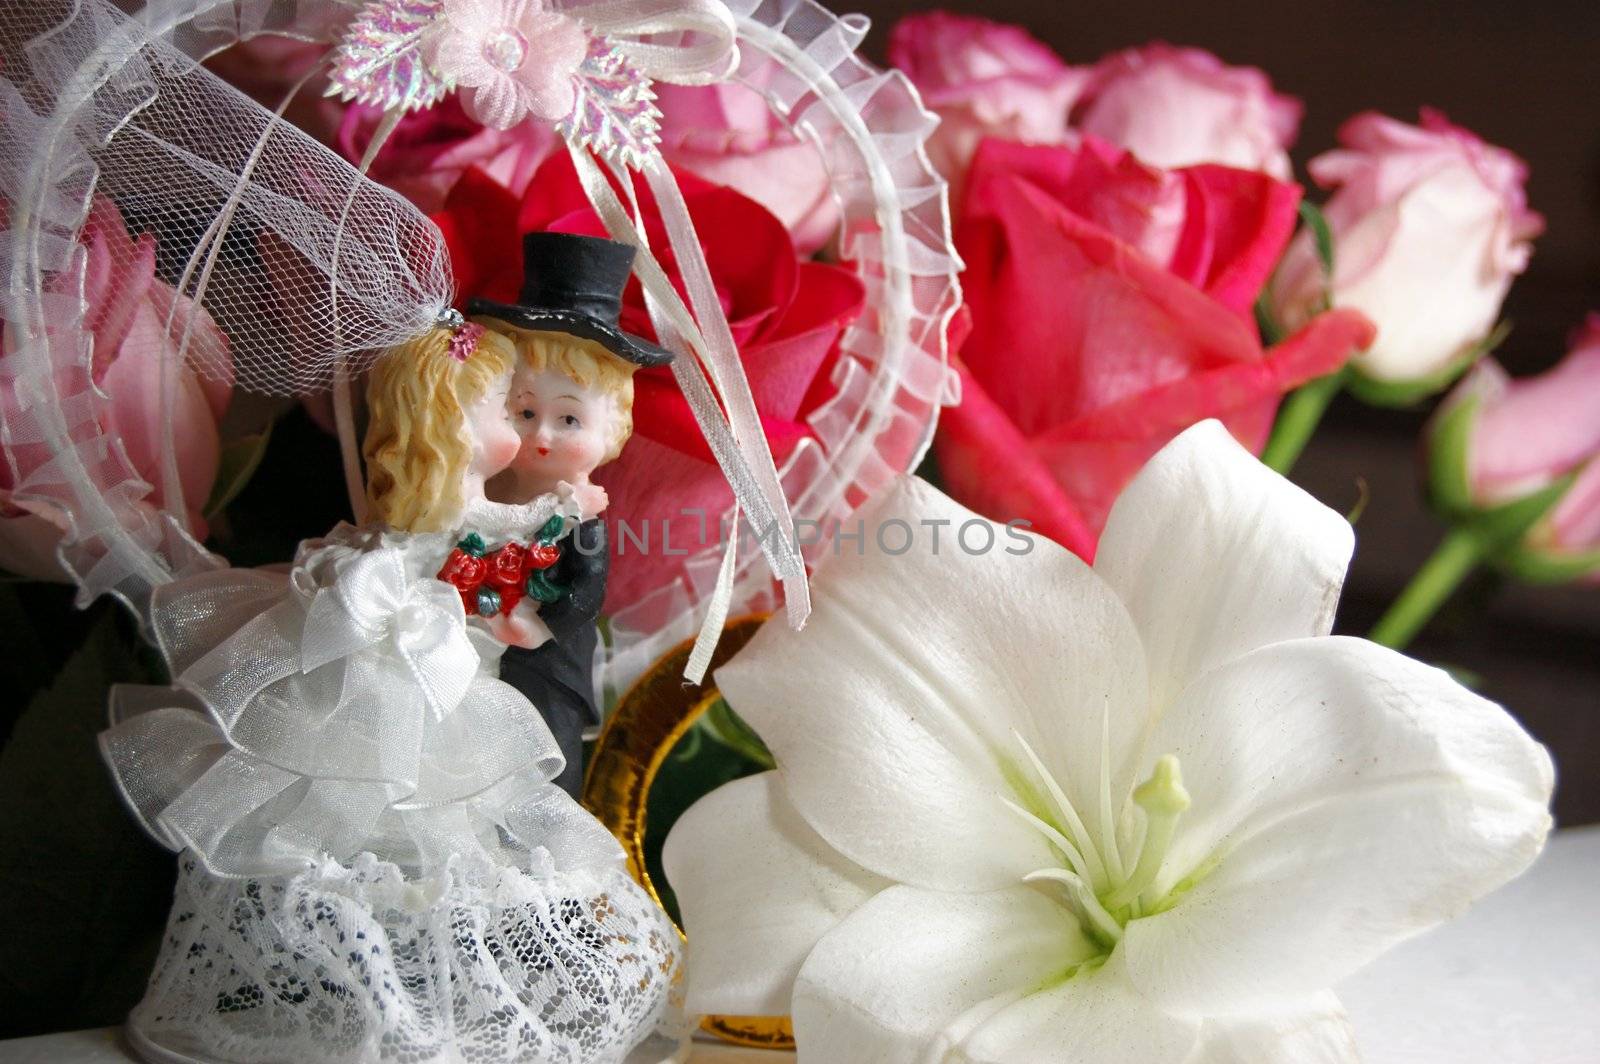 figurine of bride and groom kissing over roses background